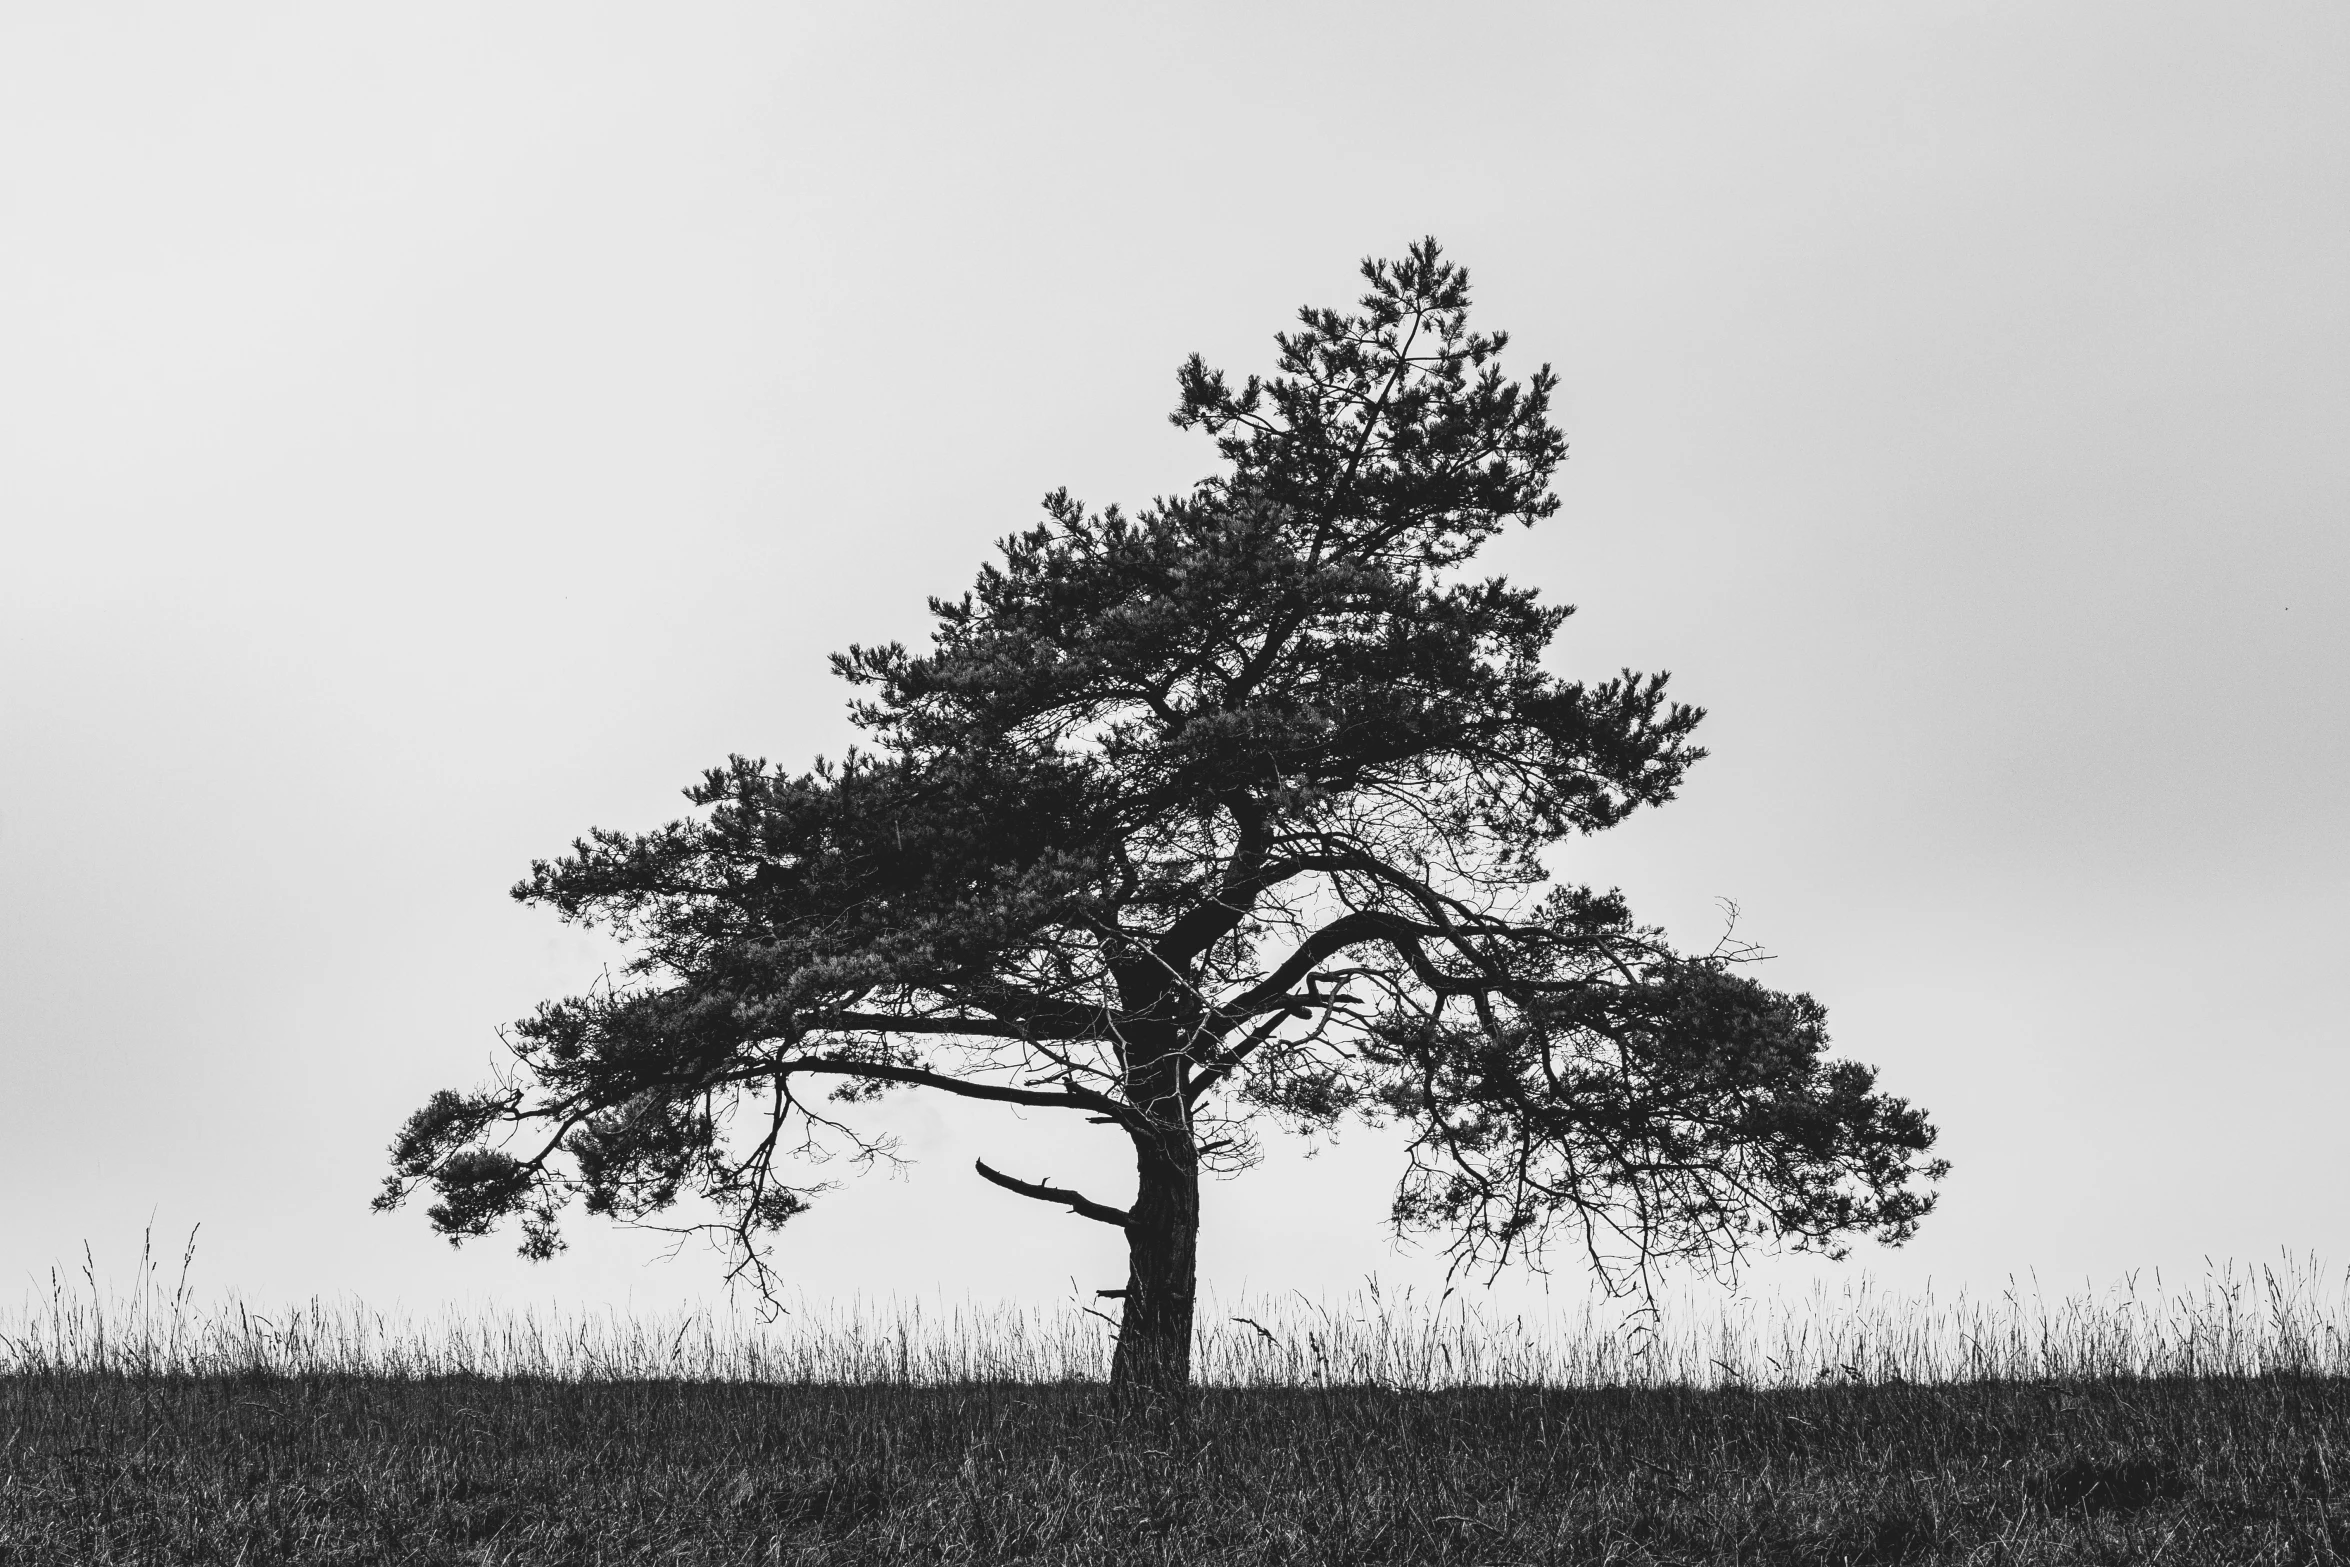 a single tree standing in a field under a cloudy sky